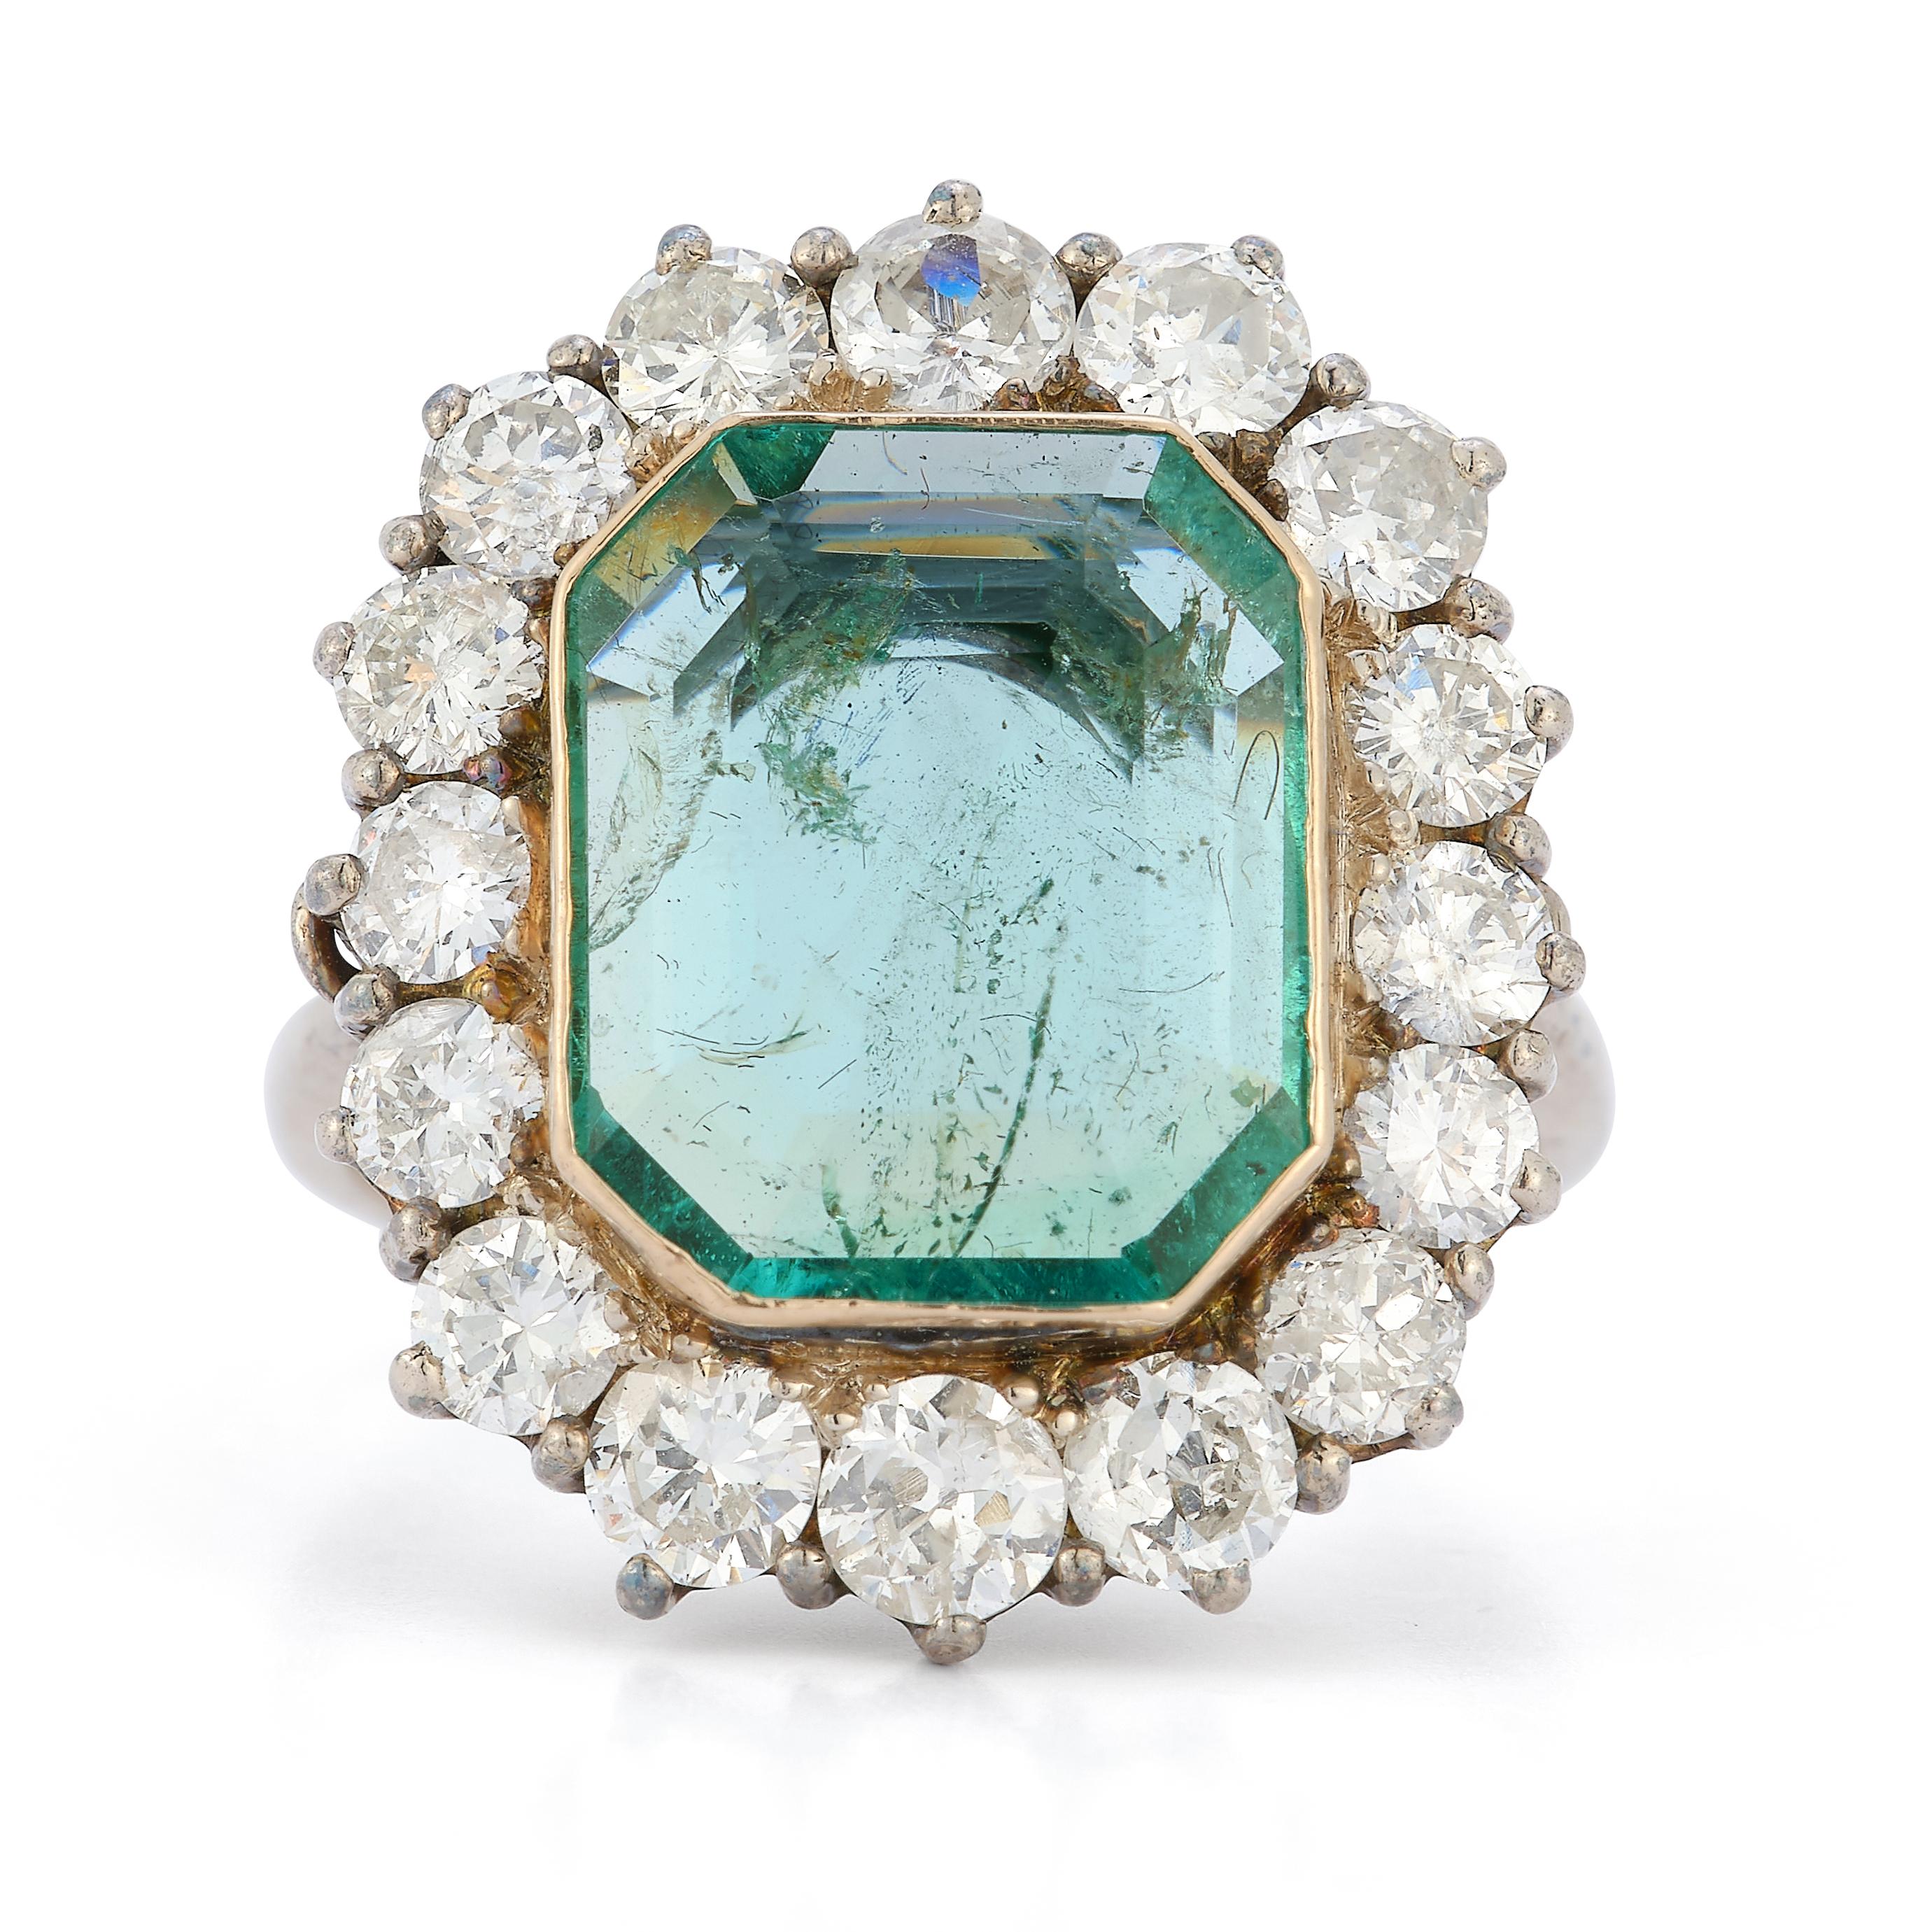 Emerald & Diamond Halo Ring

A central emerald cut emerald of approximately 3.5ct with a halo of round cut diamonds set in 14k white gold

Diamonds total approximate weight: 2.4ct

Ring Size: 8.5